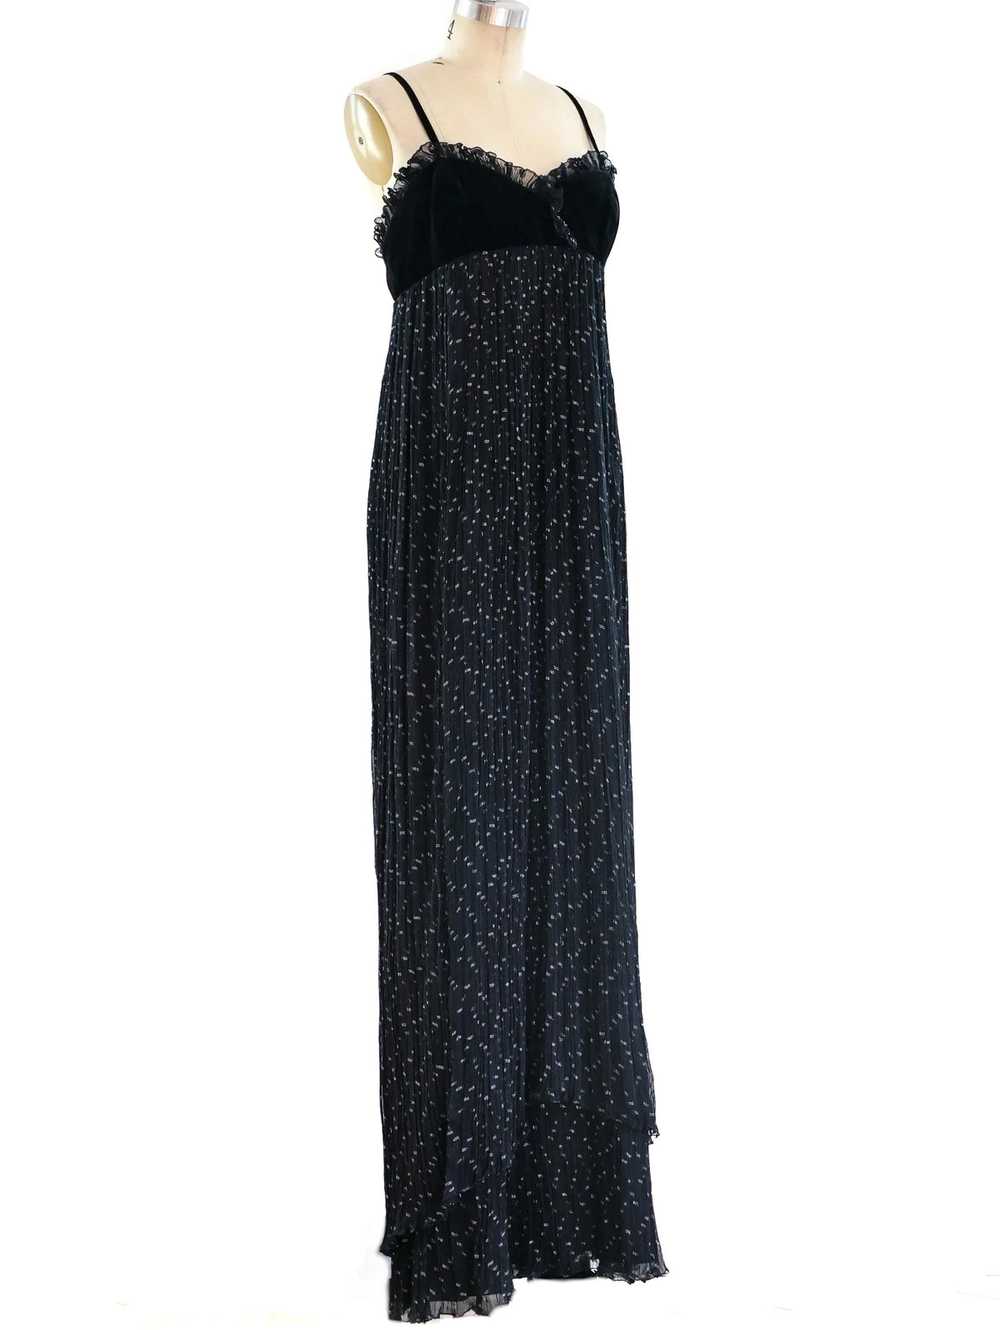 Gina Fratini Empire Gown - image 3